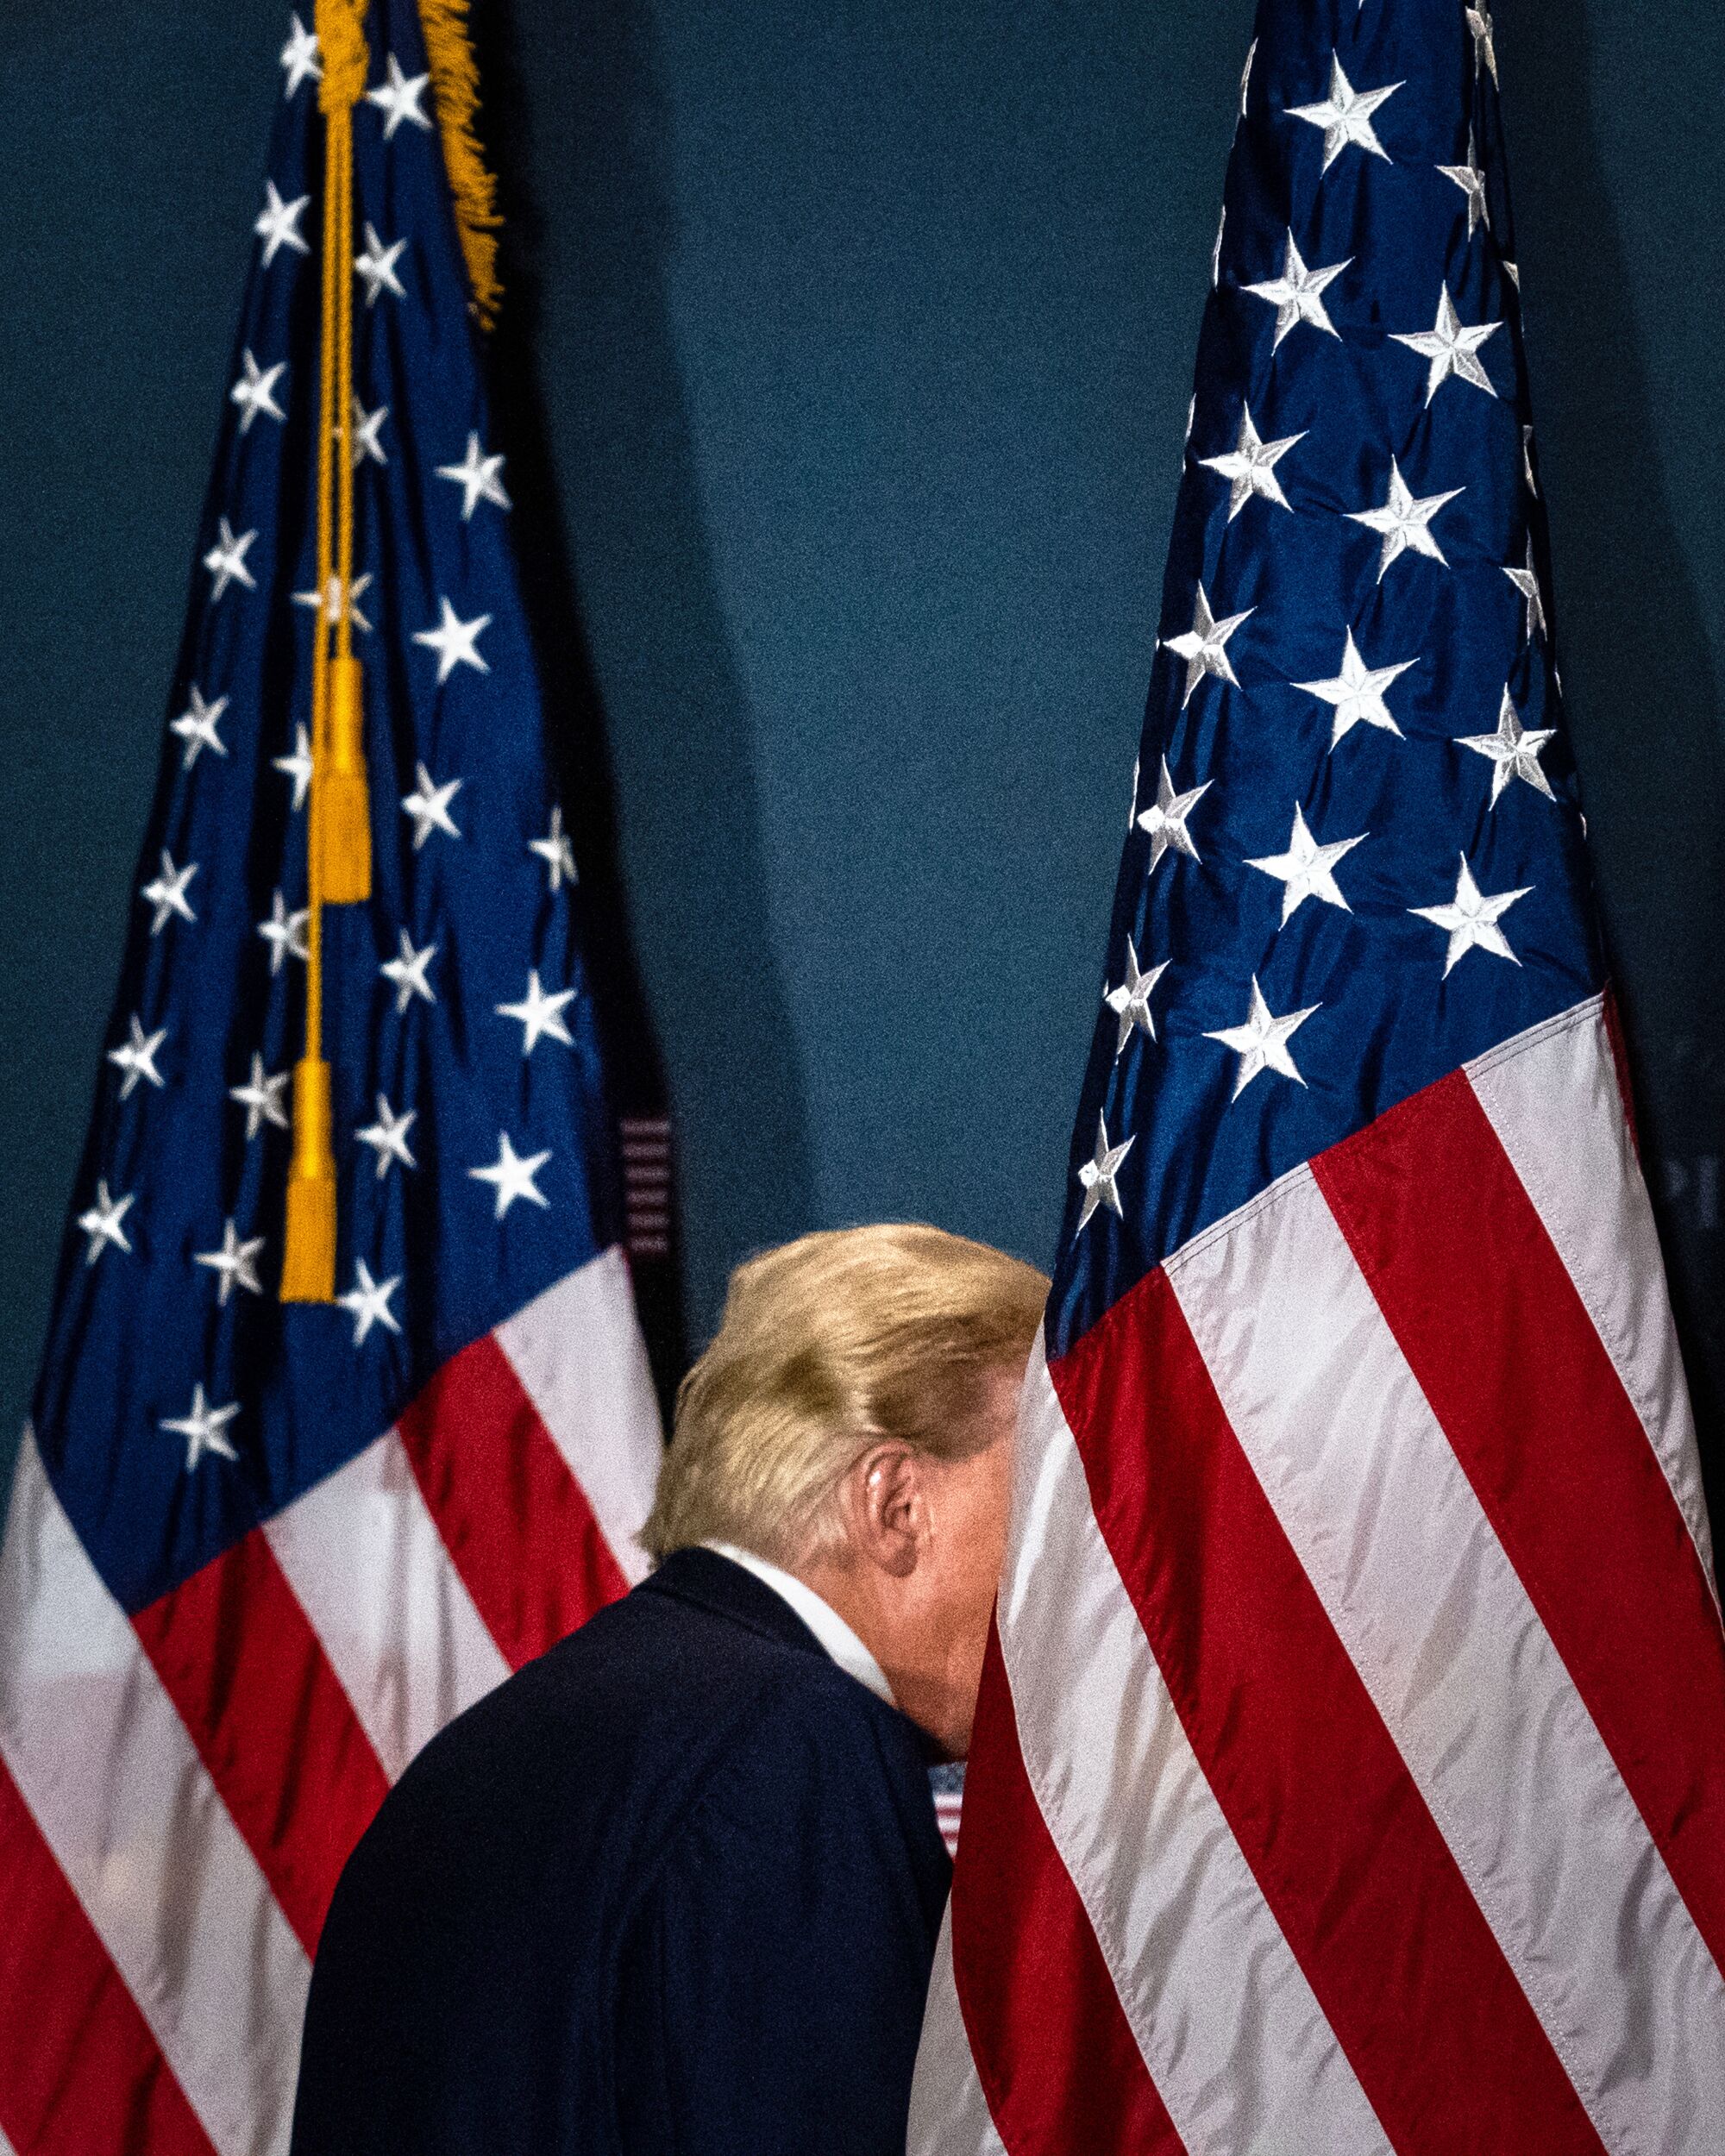 Donald Trump walks in between two American flags, his face covered by one of them.